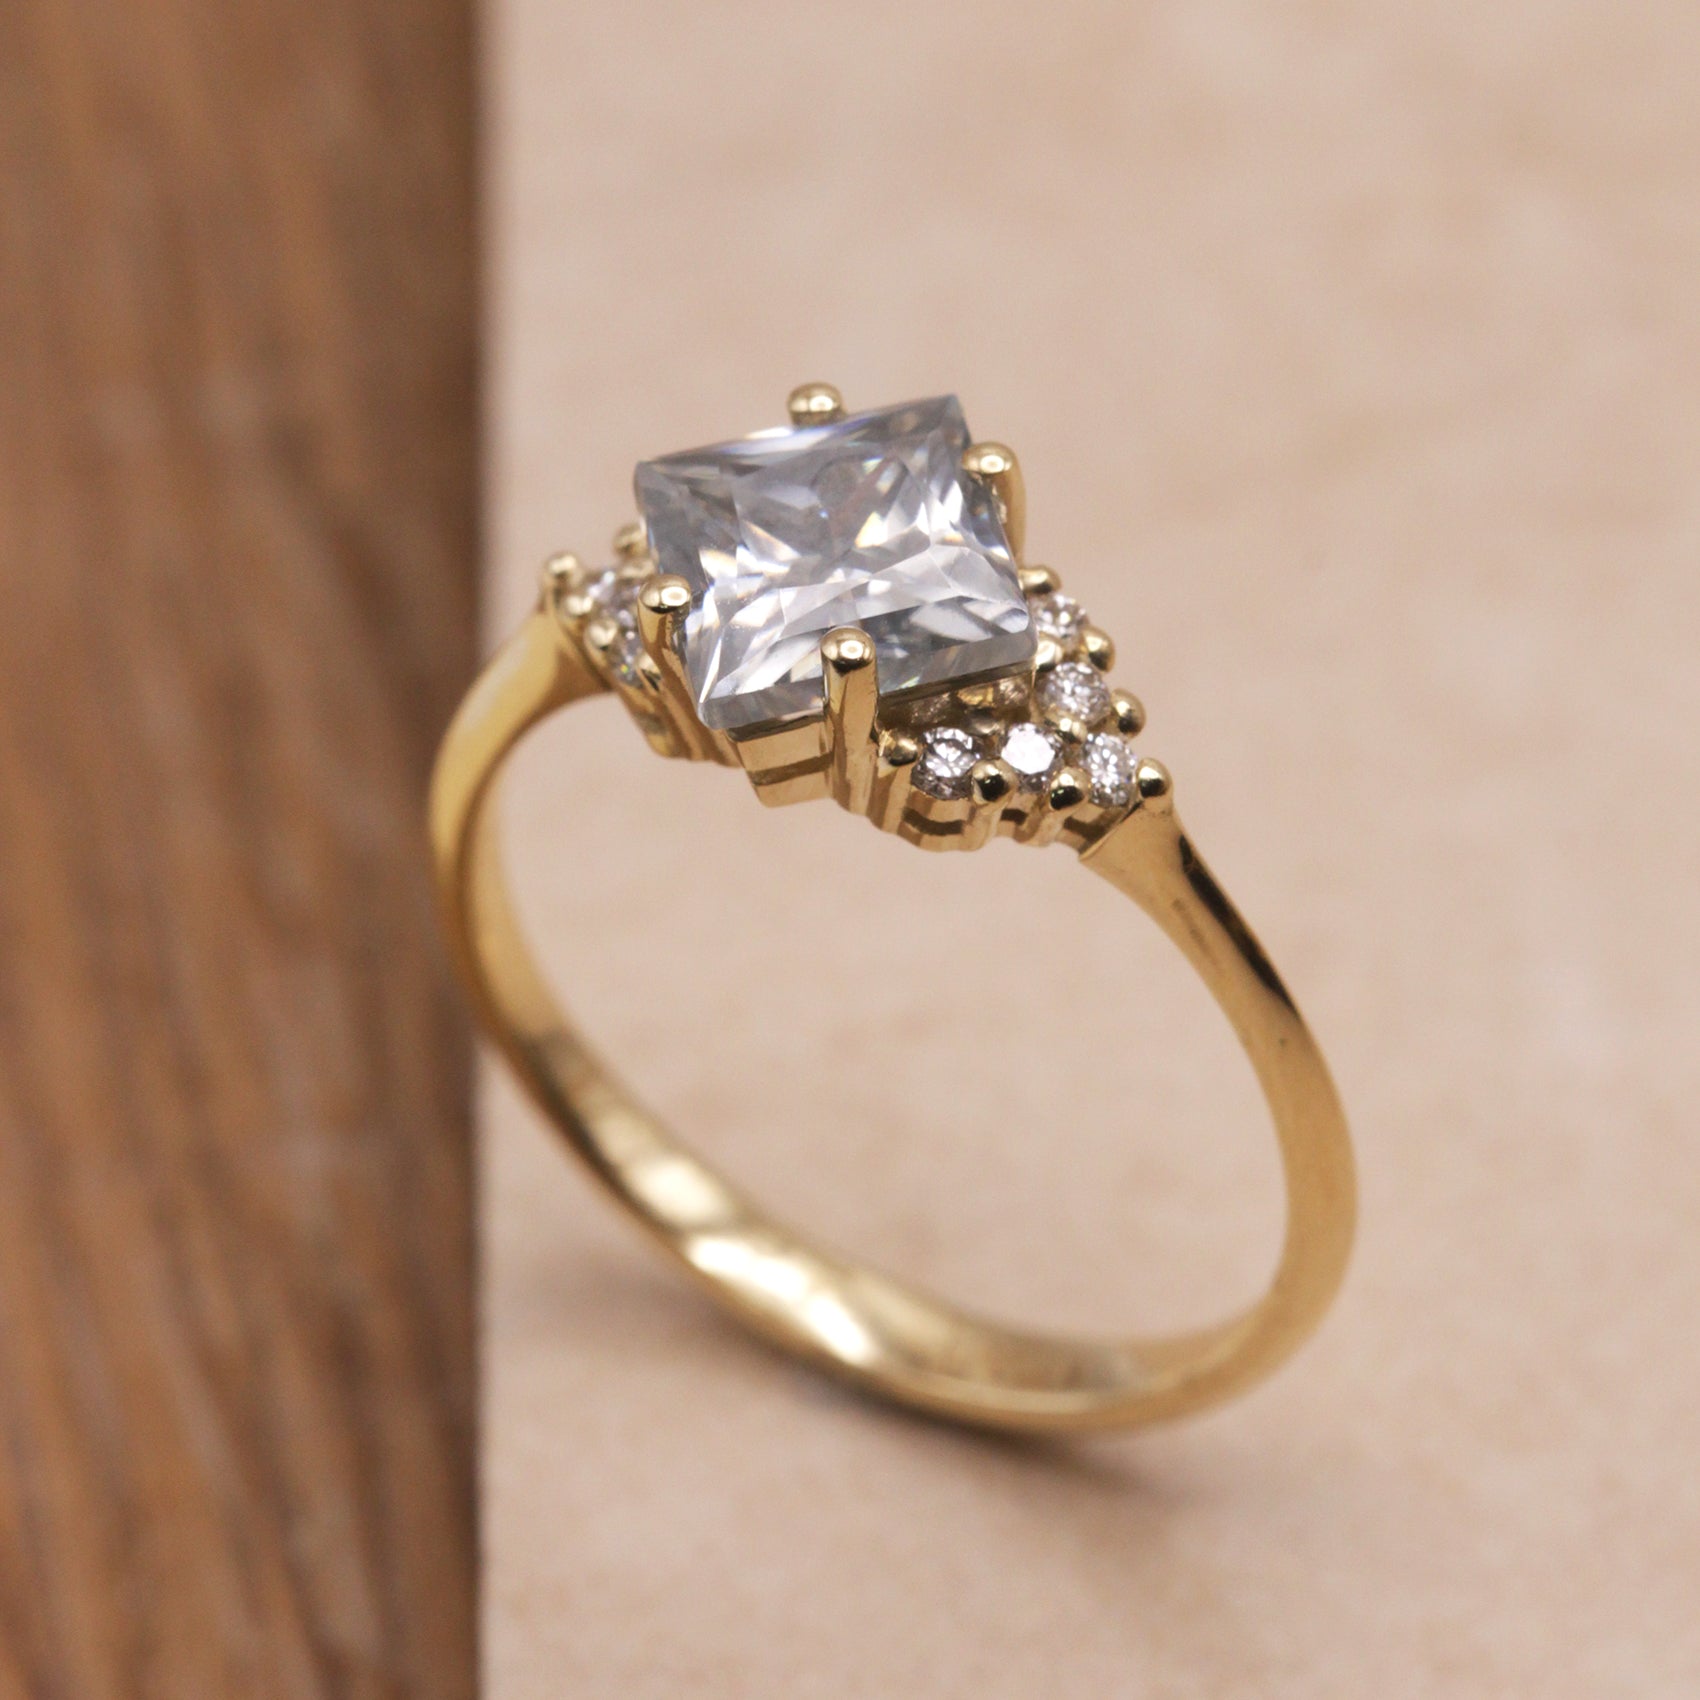 Juliette Ring With Diamonds and Moissanite